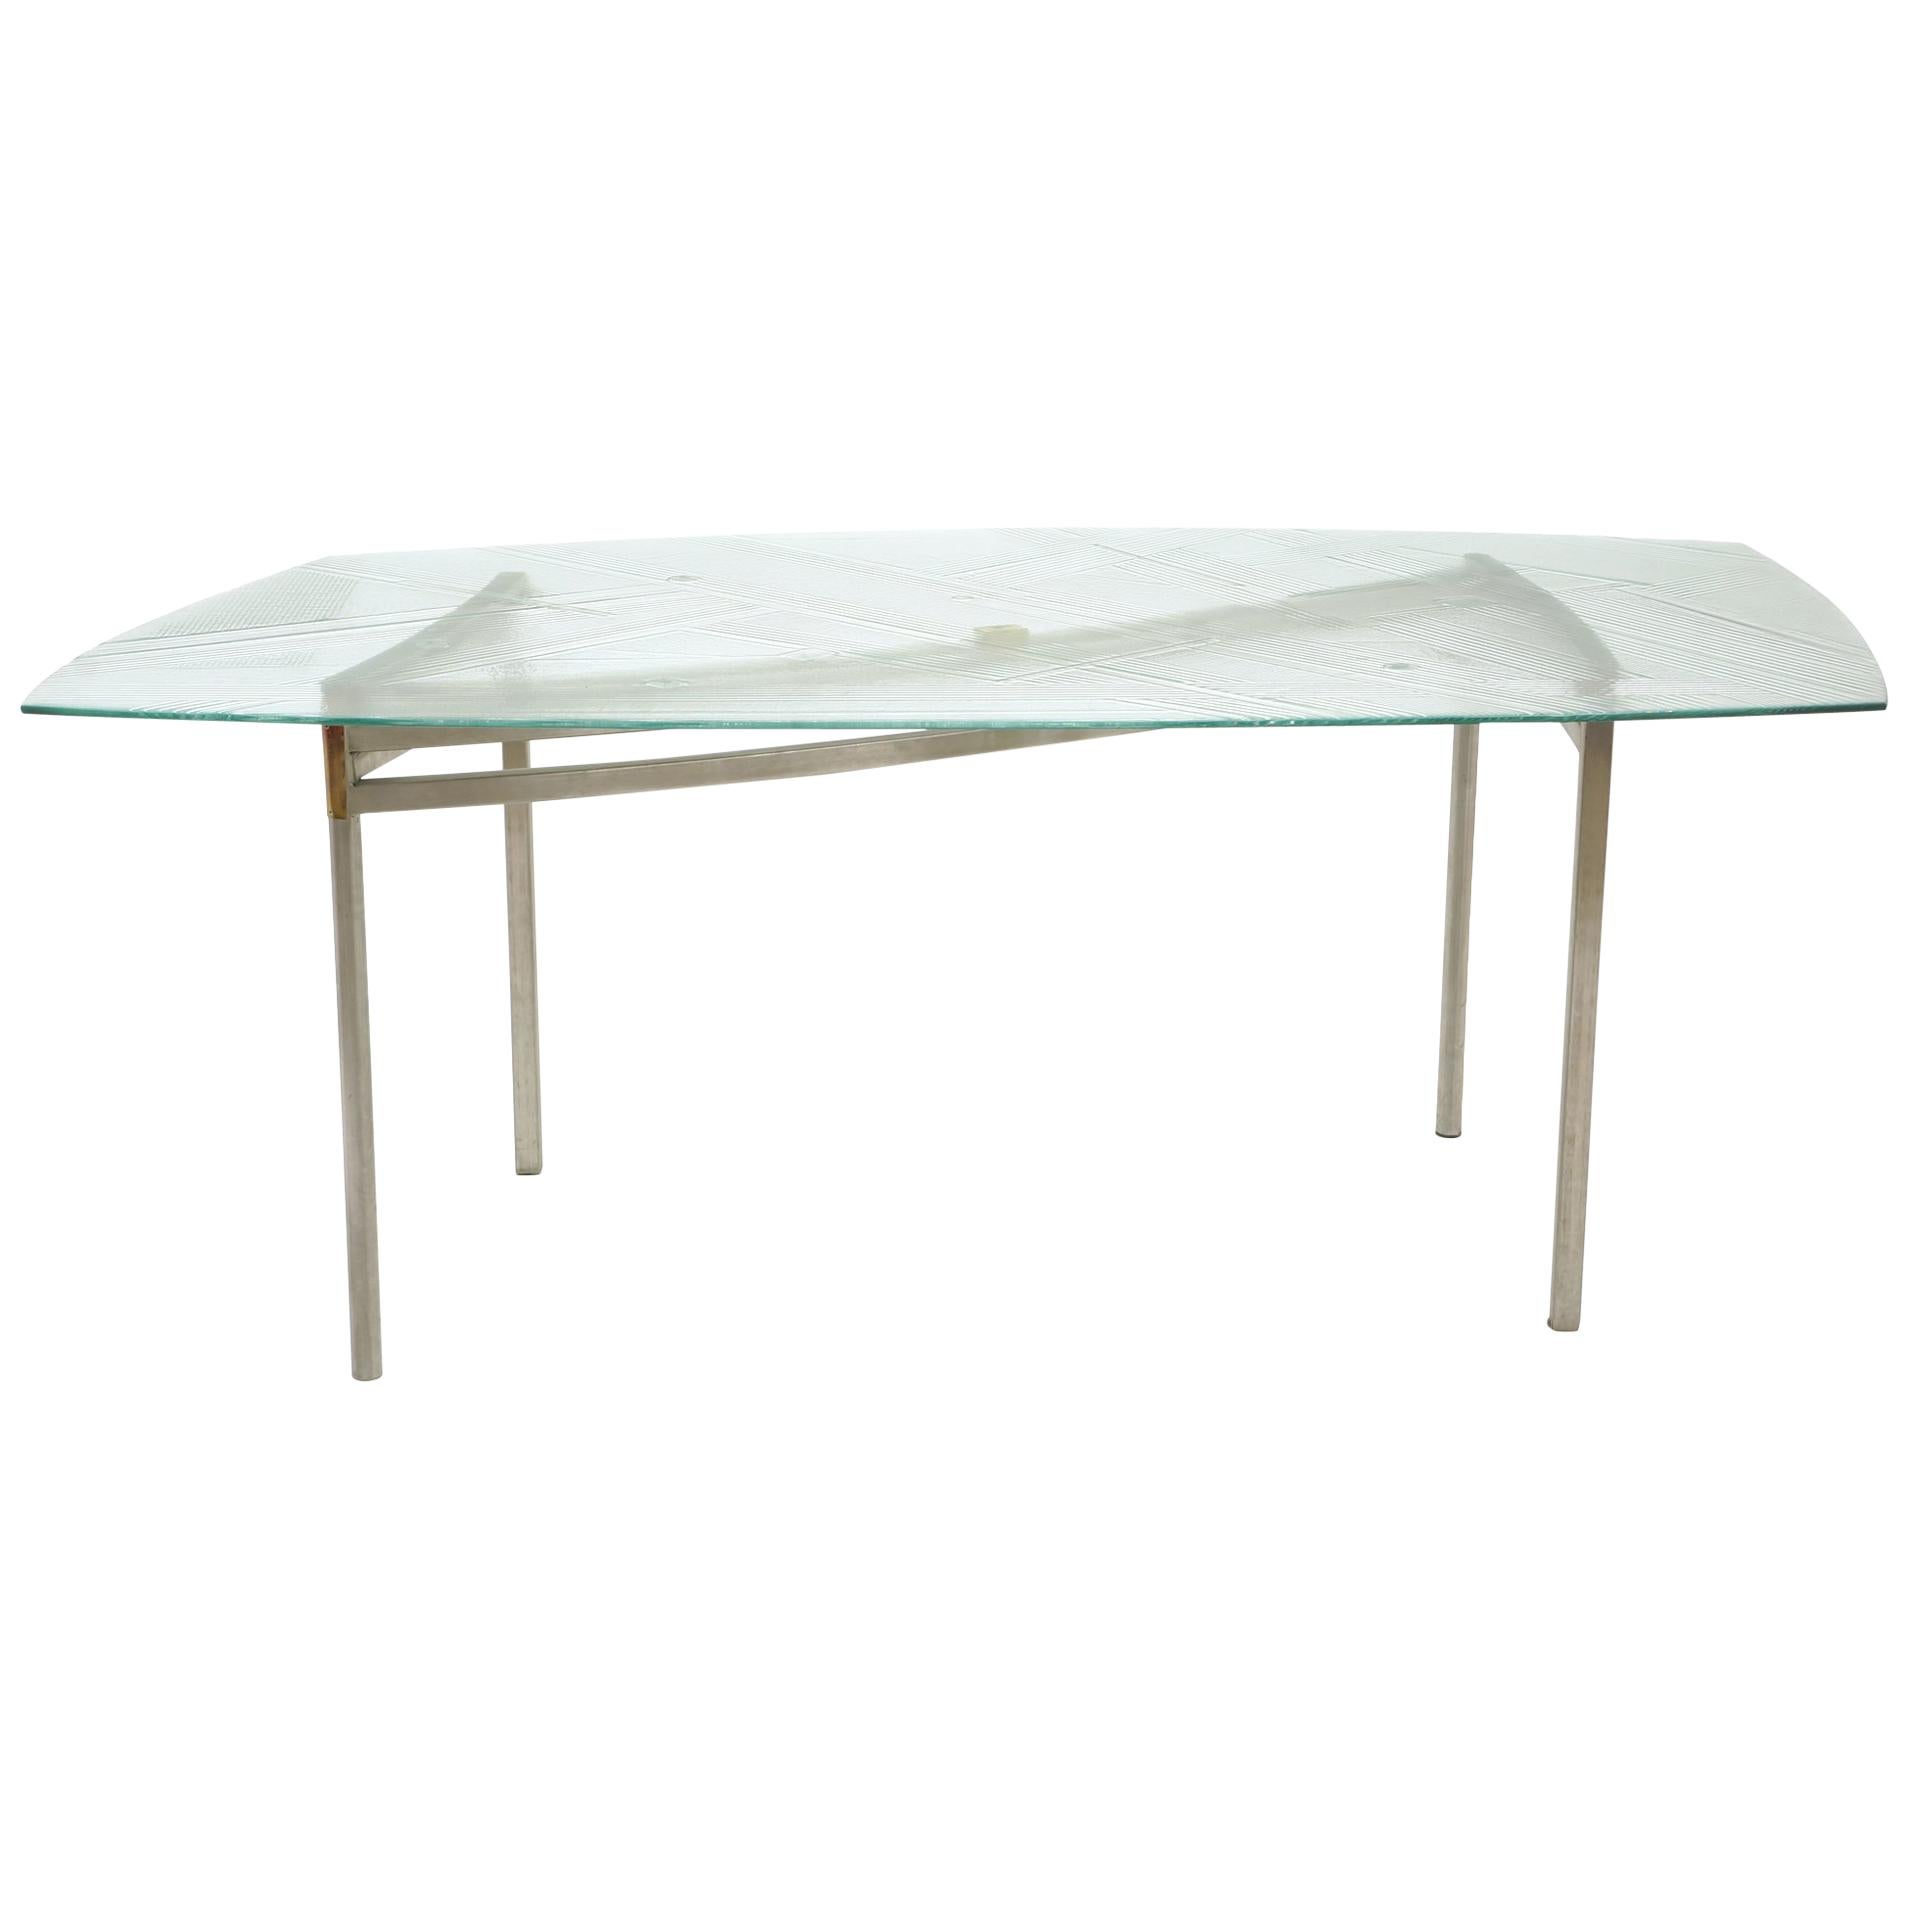 Custom Art Glass Dining Table with Aluminum Base, Unique, One of a Kind